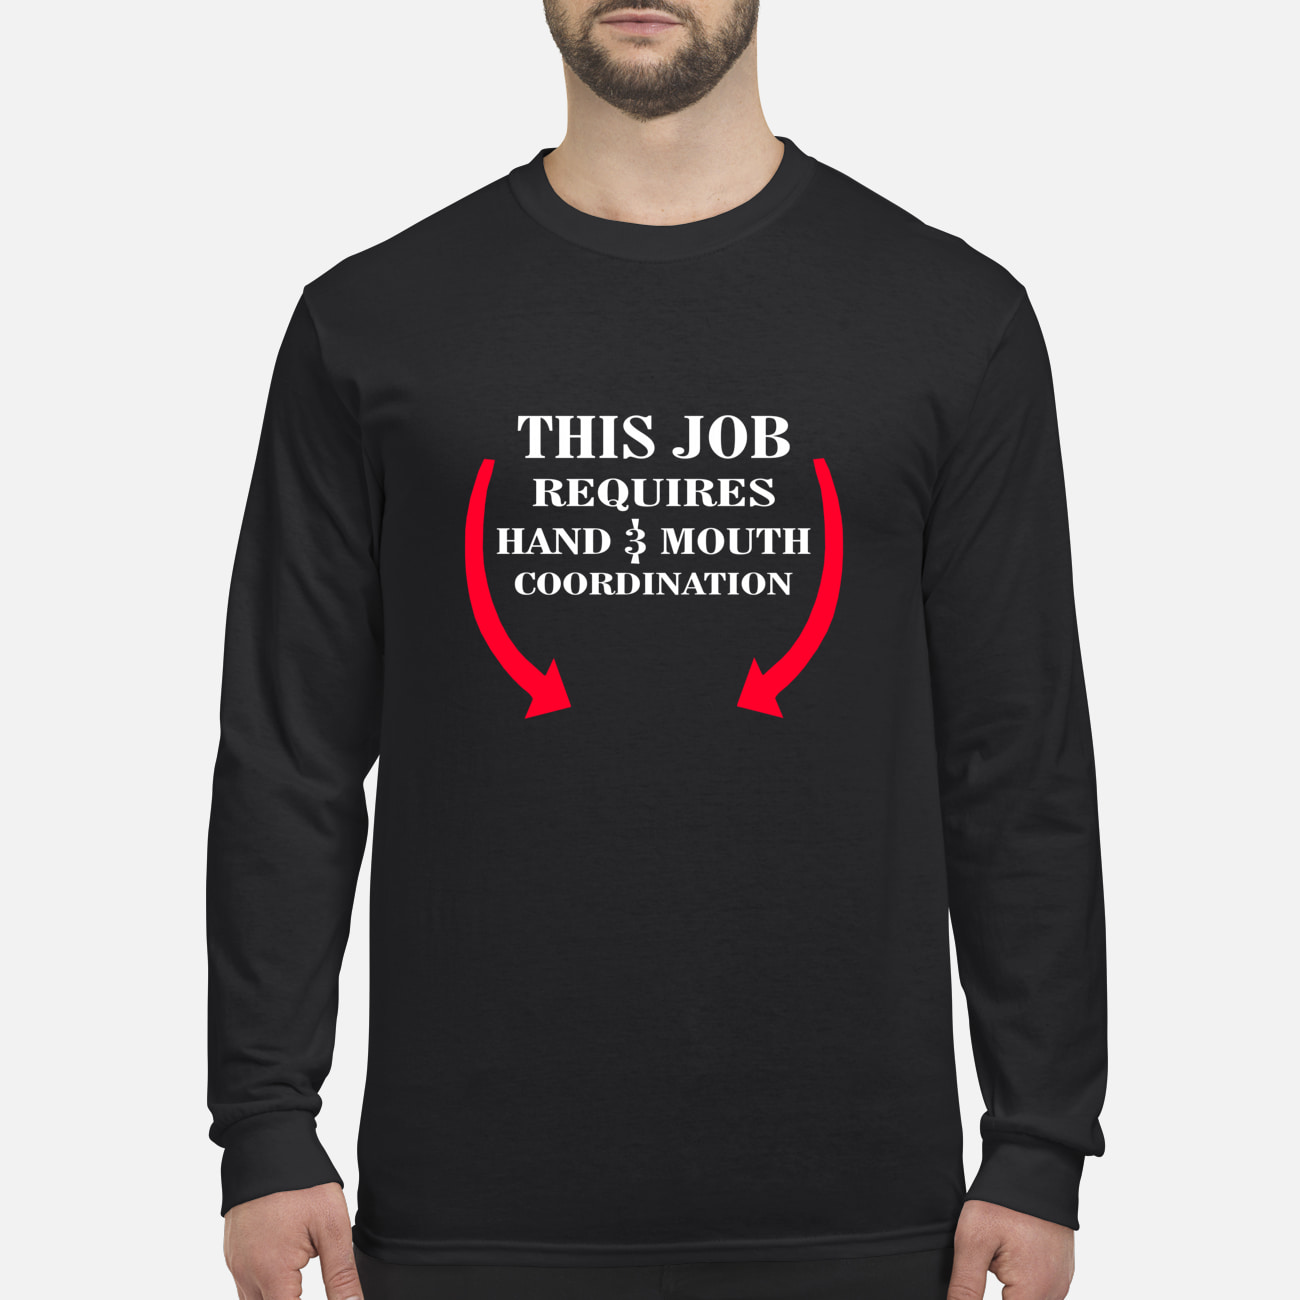 This Job Requires Hand 3 Month Coordination Shirt